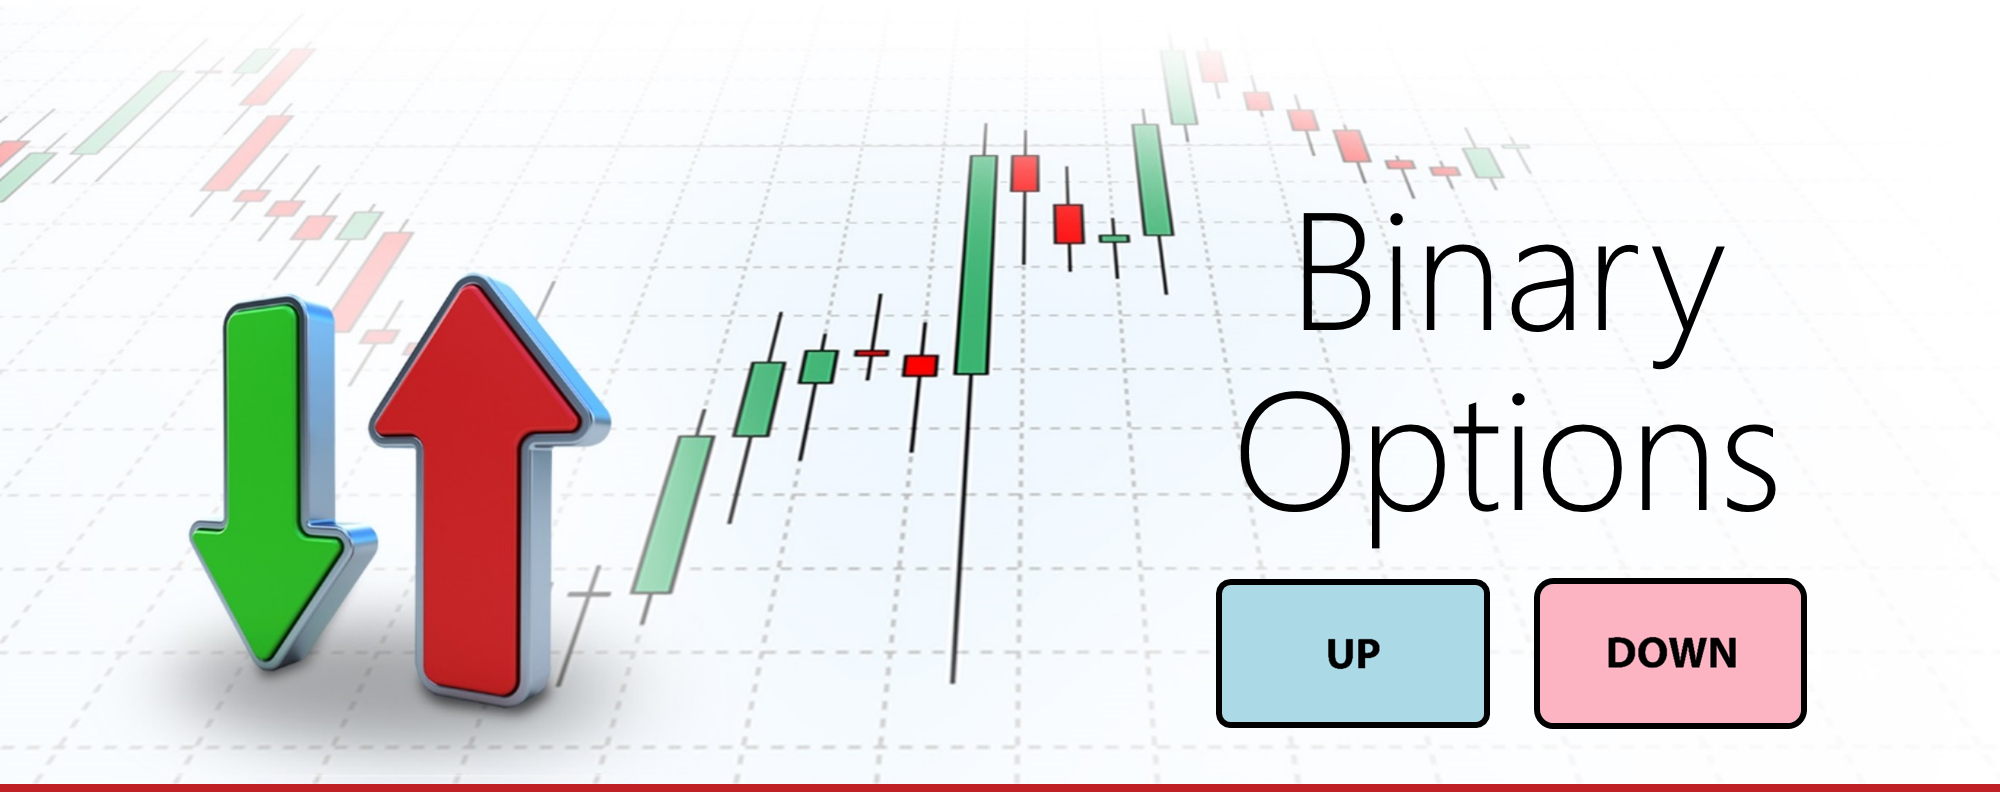 Paying binary options with what forex deposit